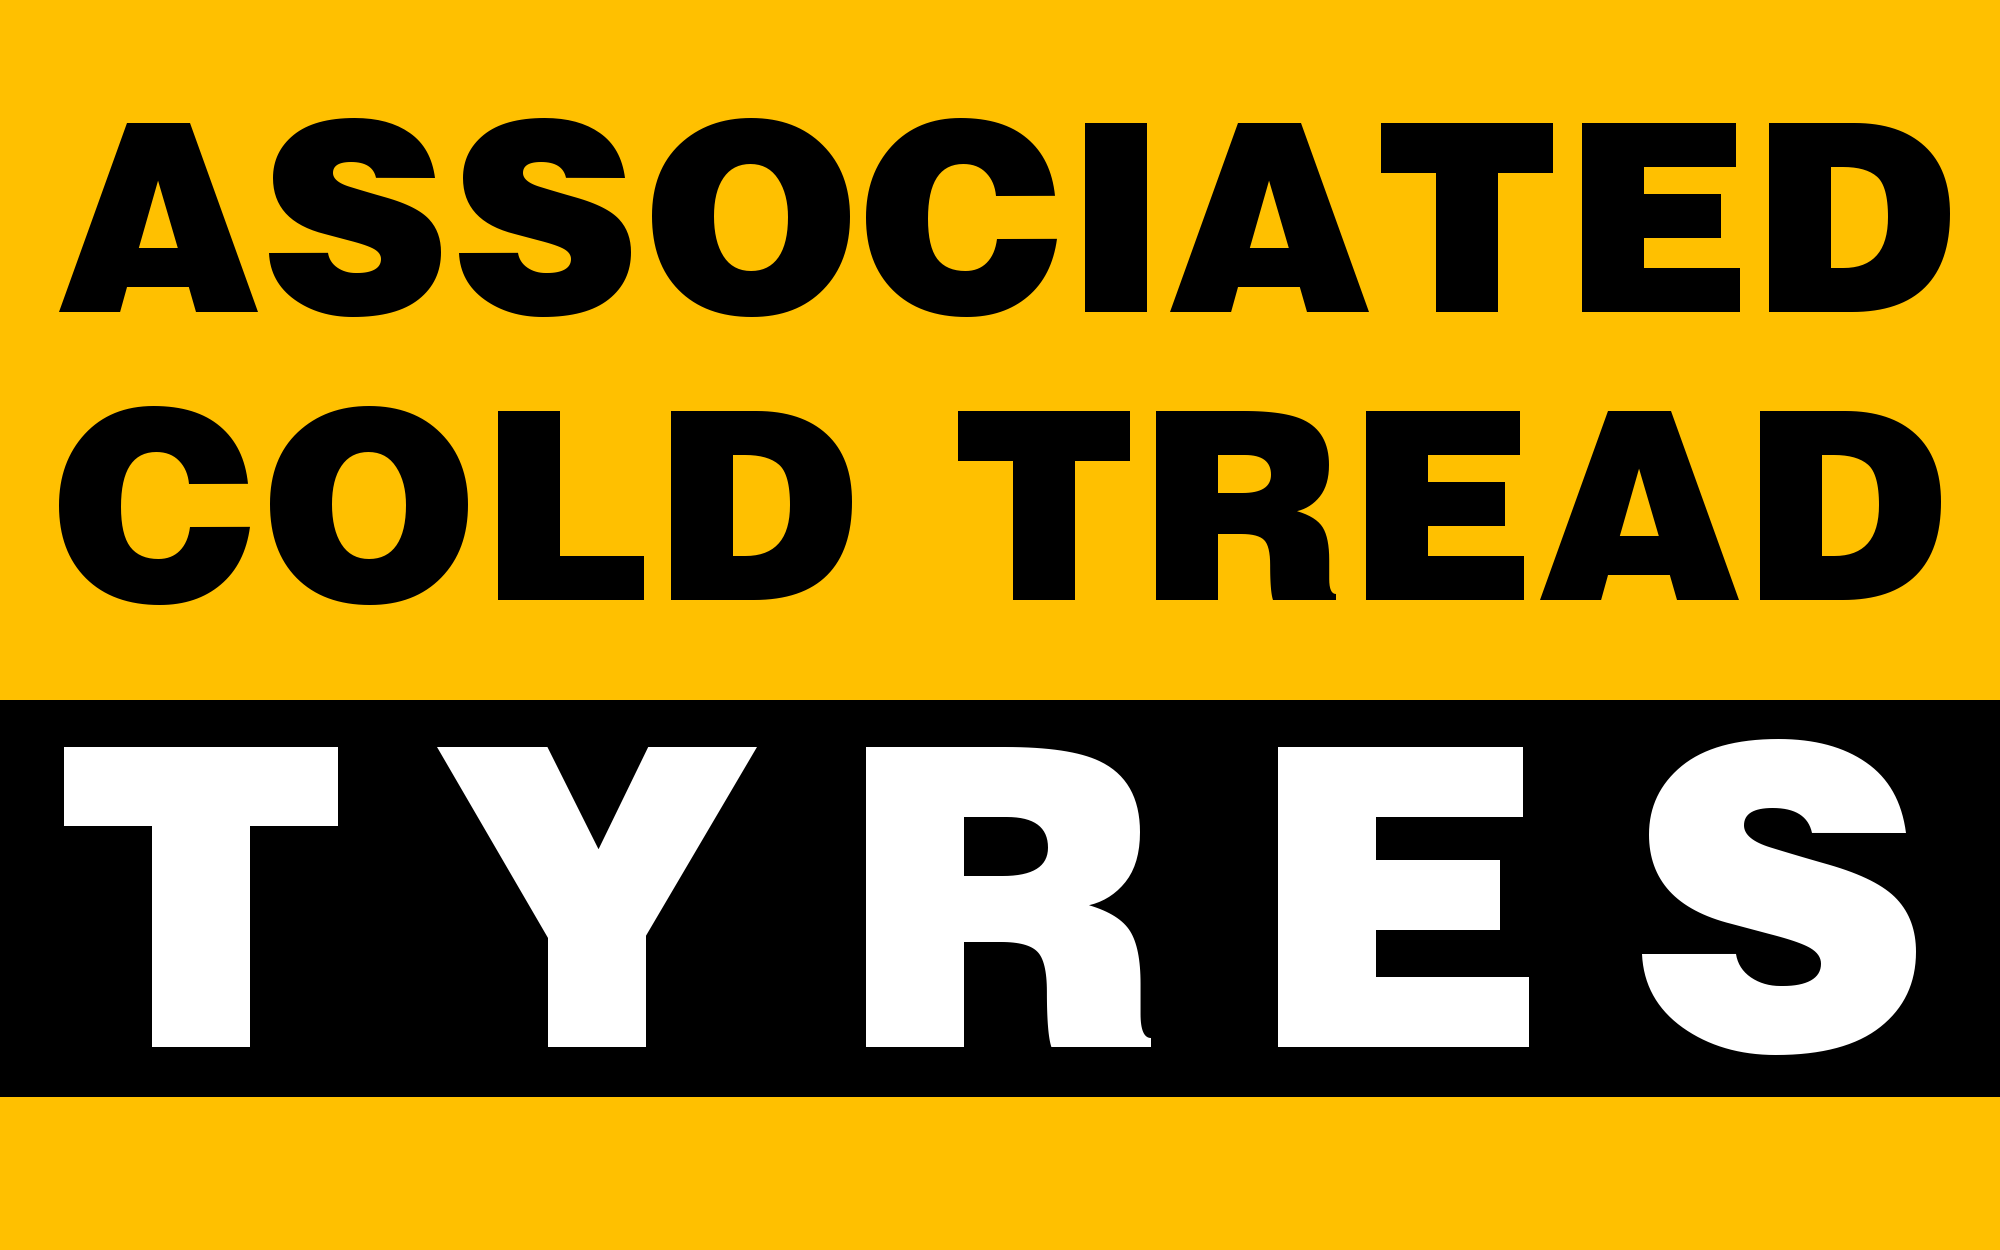 Associated Cold Tread Tyres